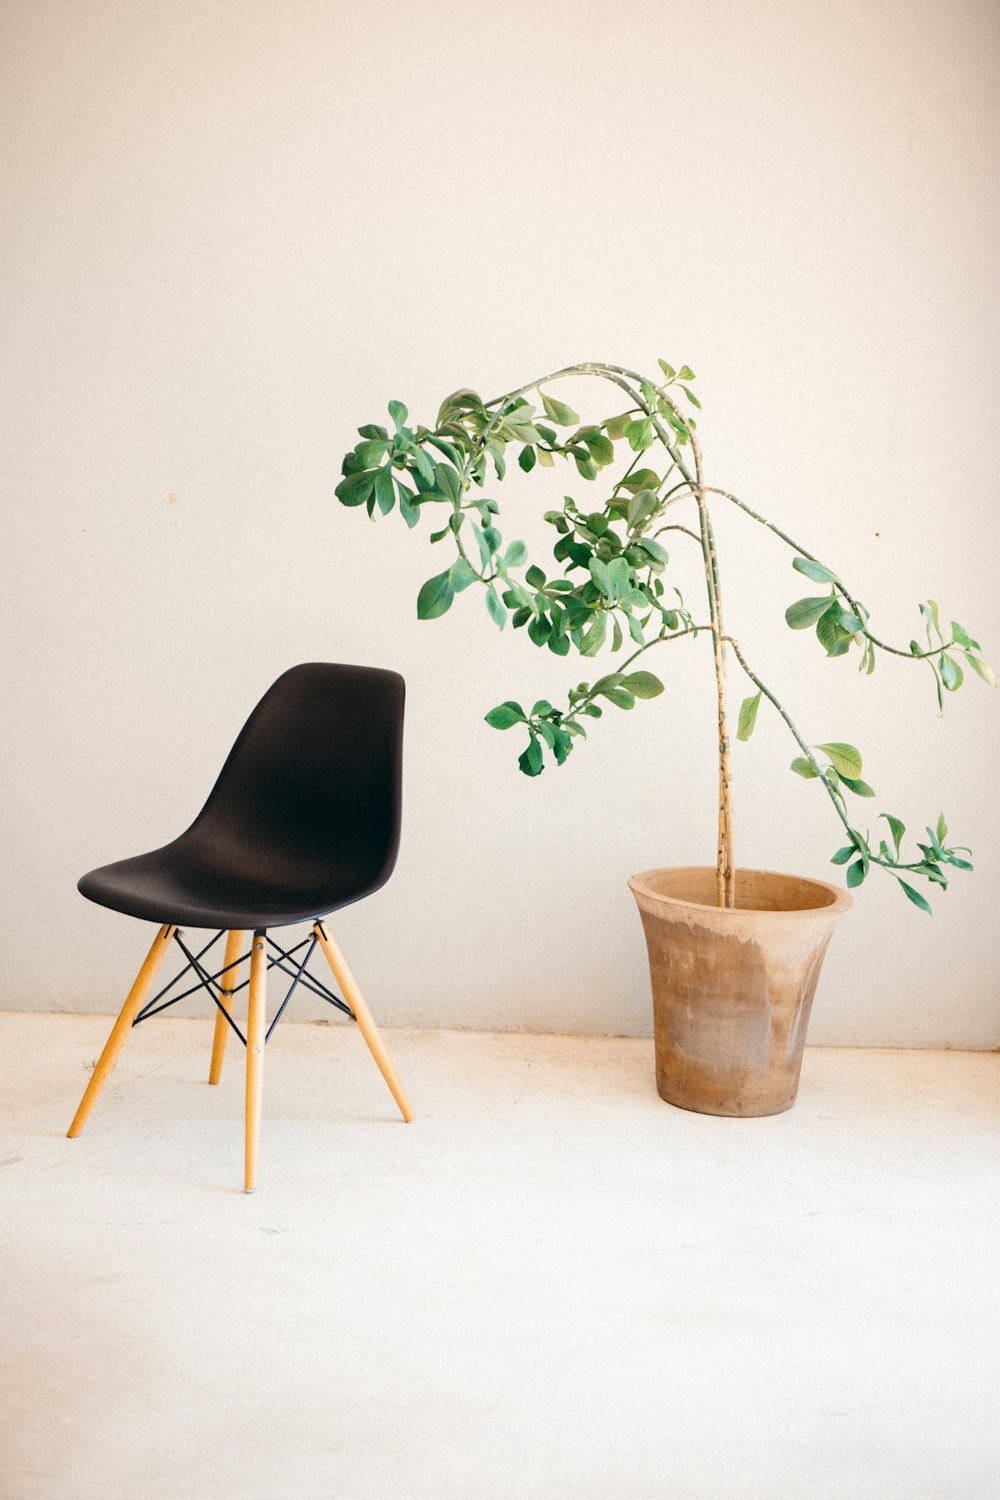 a chair next to a potted plant on a white floor